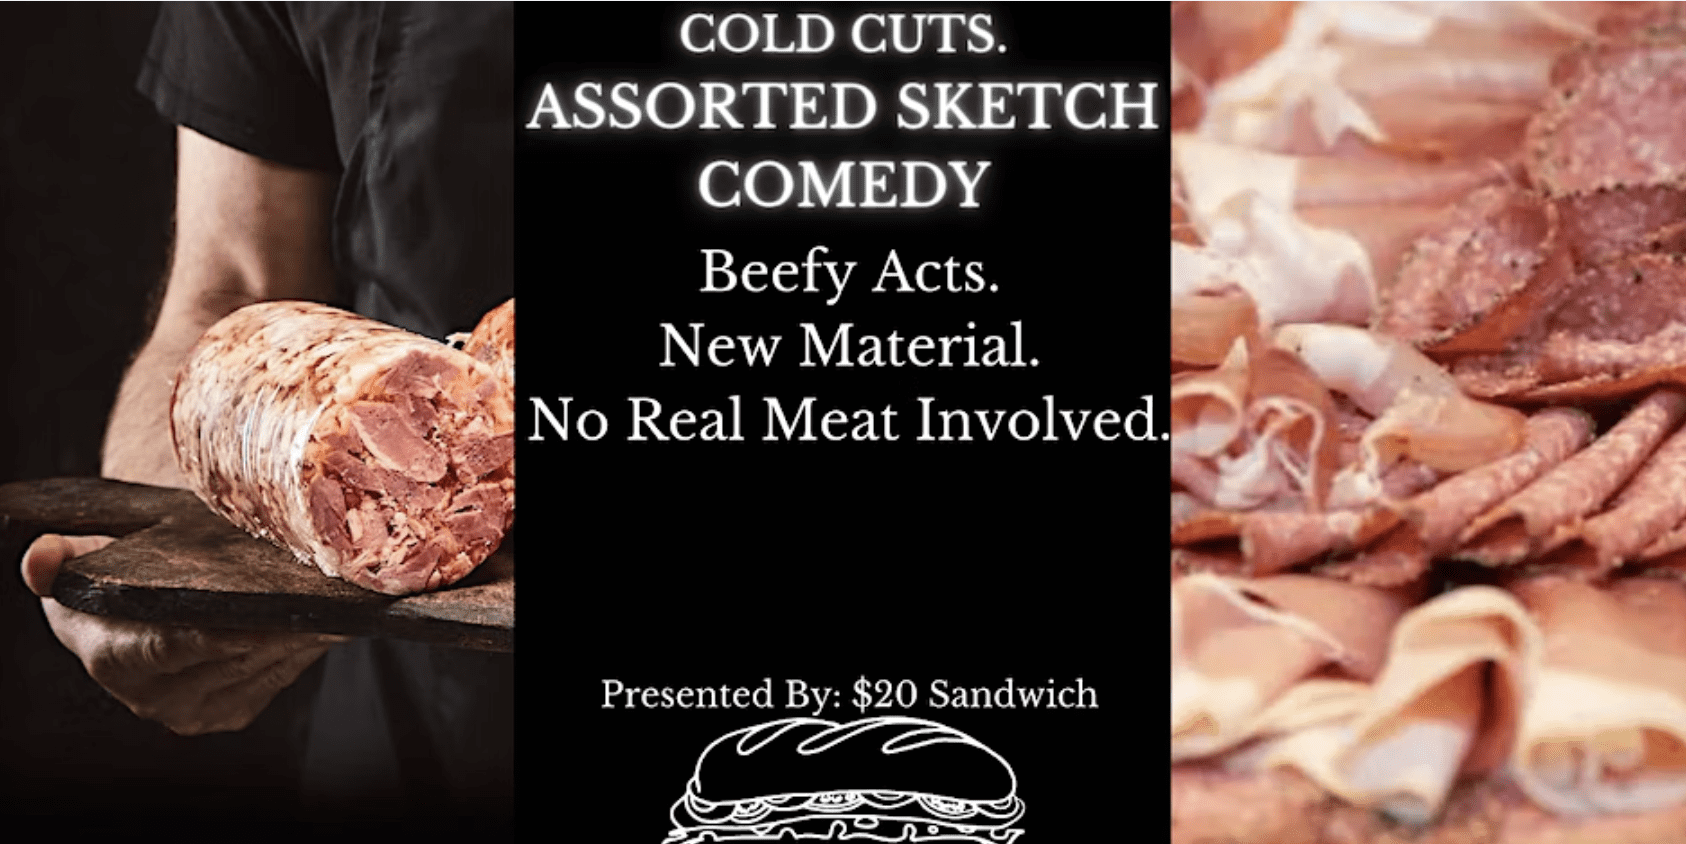 Cold Cuts Assorted Sketch Comedy graphic - black bar of text with event details in front of piles of cold cut meats